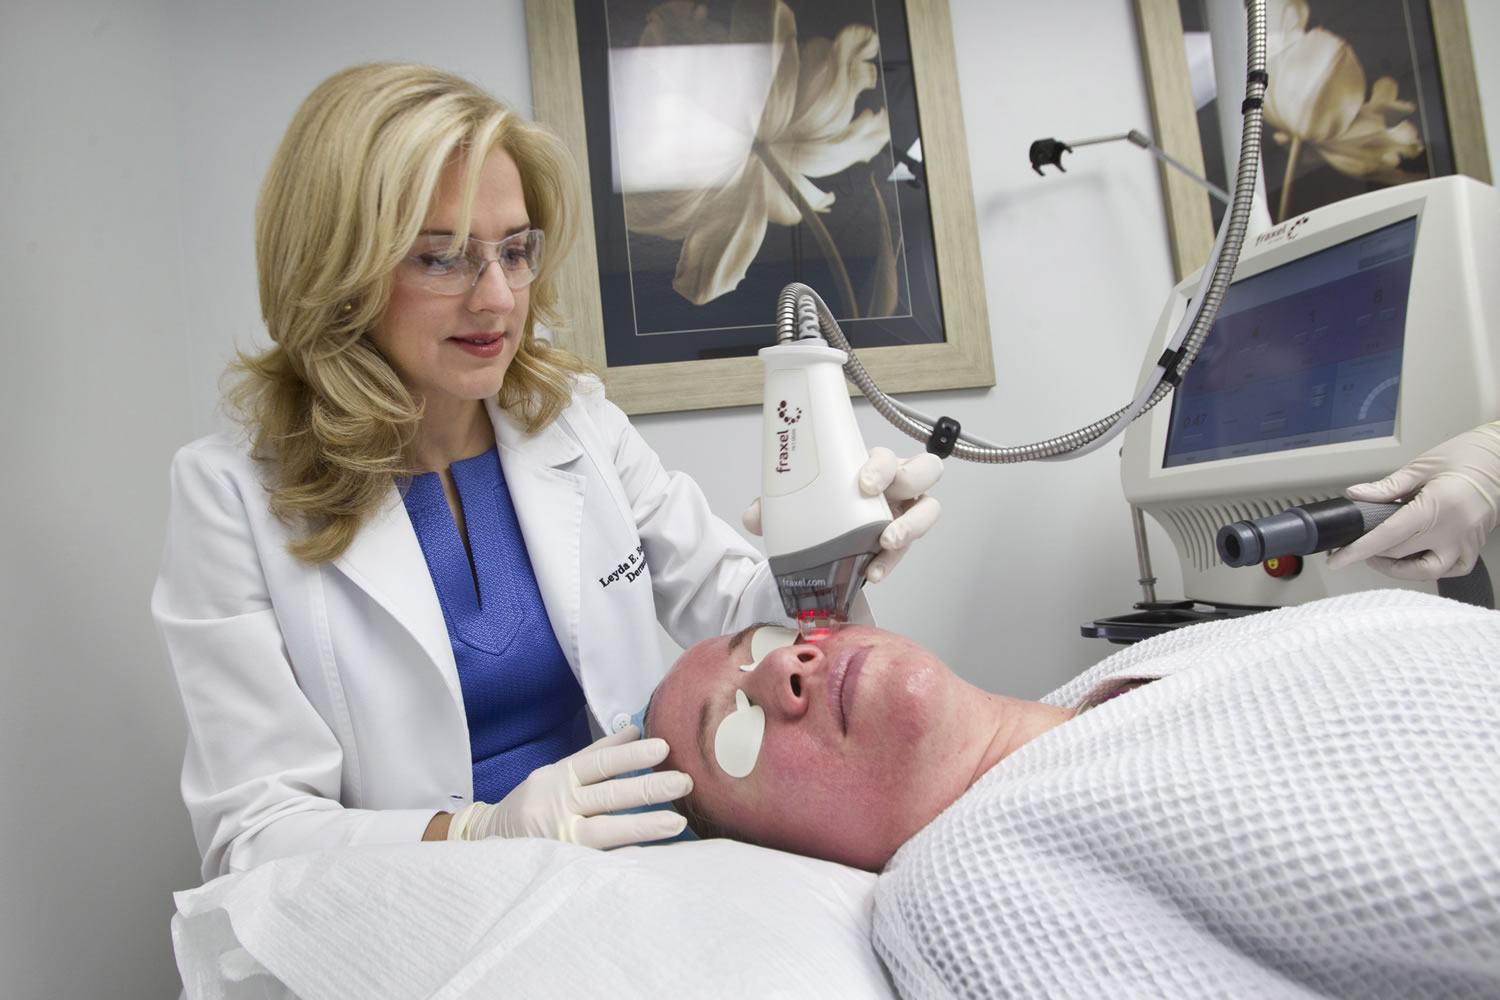 Dr. Leyda E. Bowens performs a Fraxel Laser treatment for wrinkles and acne scars on Maria Elena Ferrer on the Mercy Hospital campus in Miami, Florida,  on April 17, 2013. (C.W.